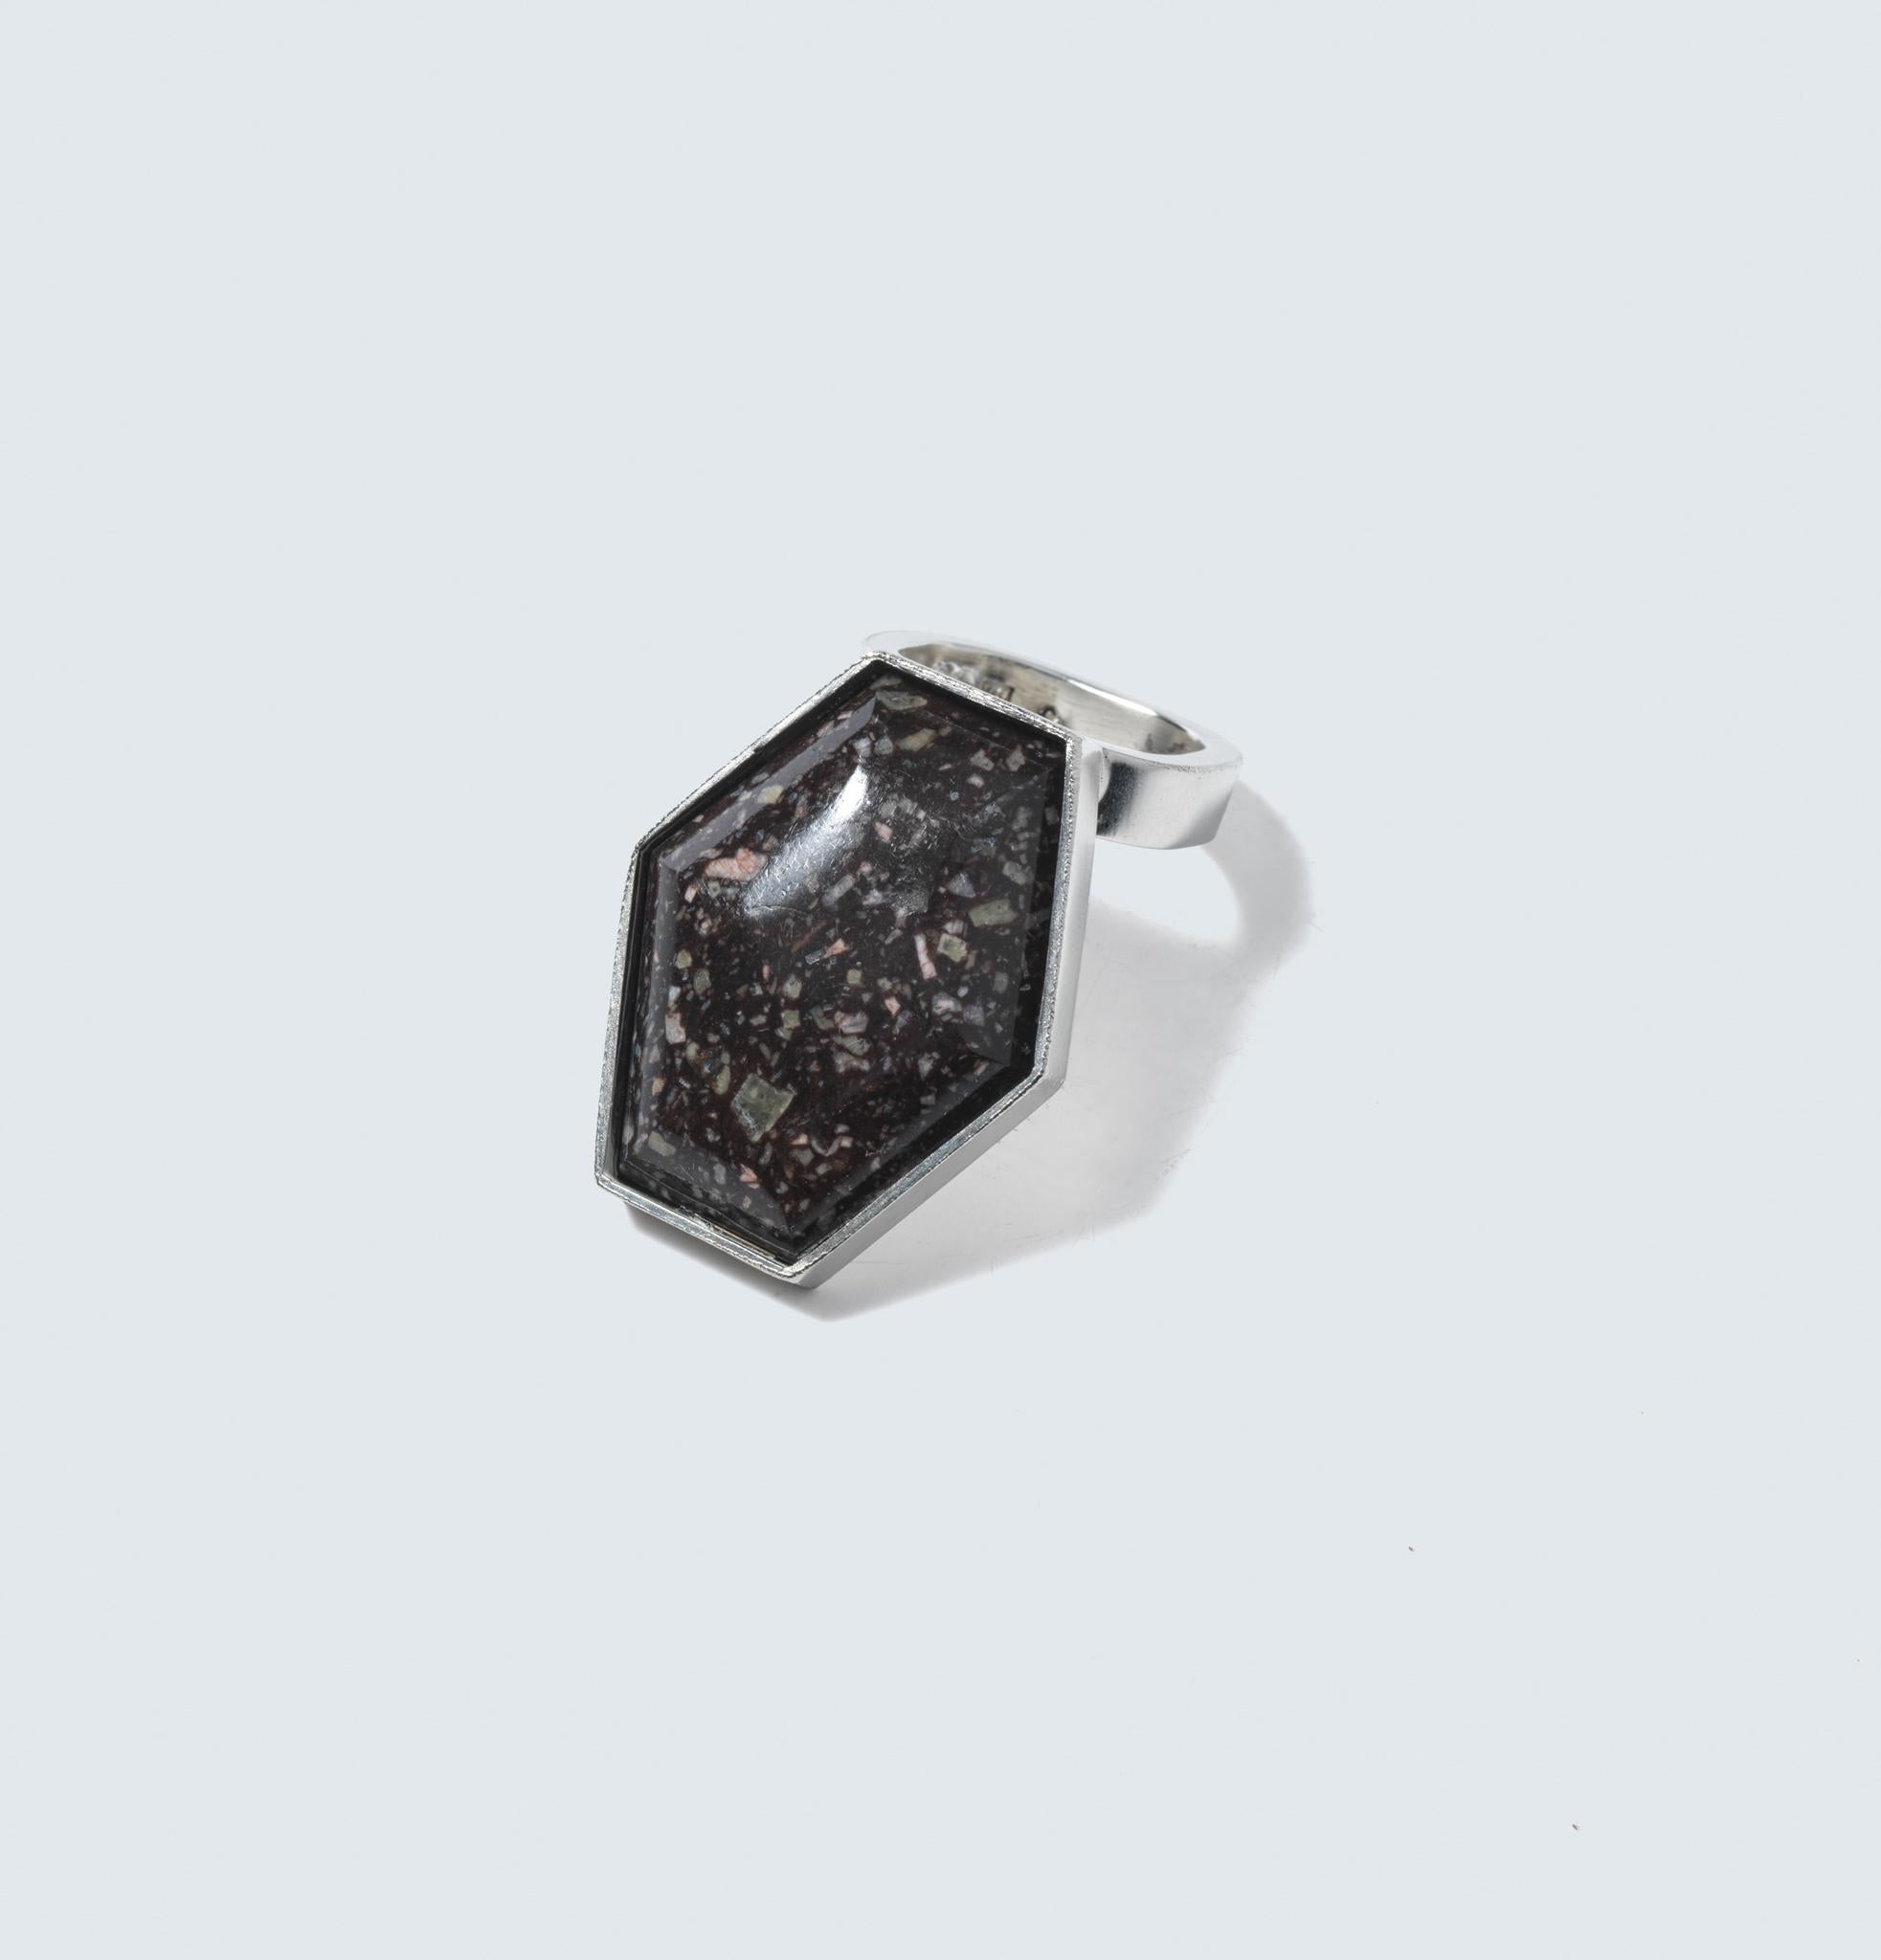 This magnificent ring encapsulates the essence of Forsberg's craftsmanship, merging sterling silver with the earthy allure of porphyry to fashion a truly unique and captivating adornment. The ring features a wide, flat band that seamlessly rises to